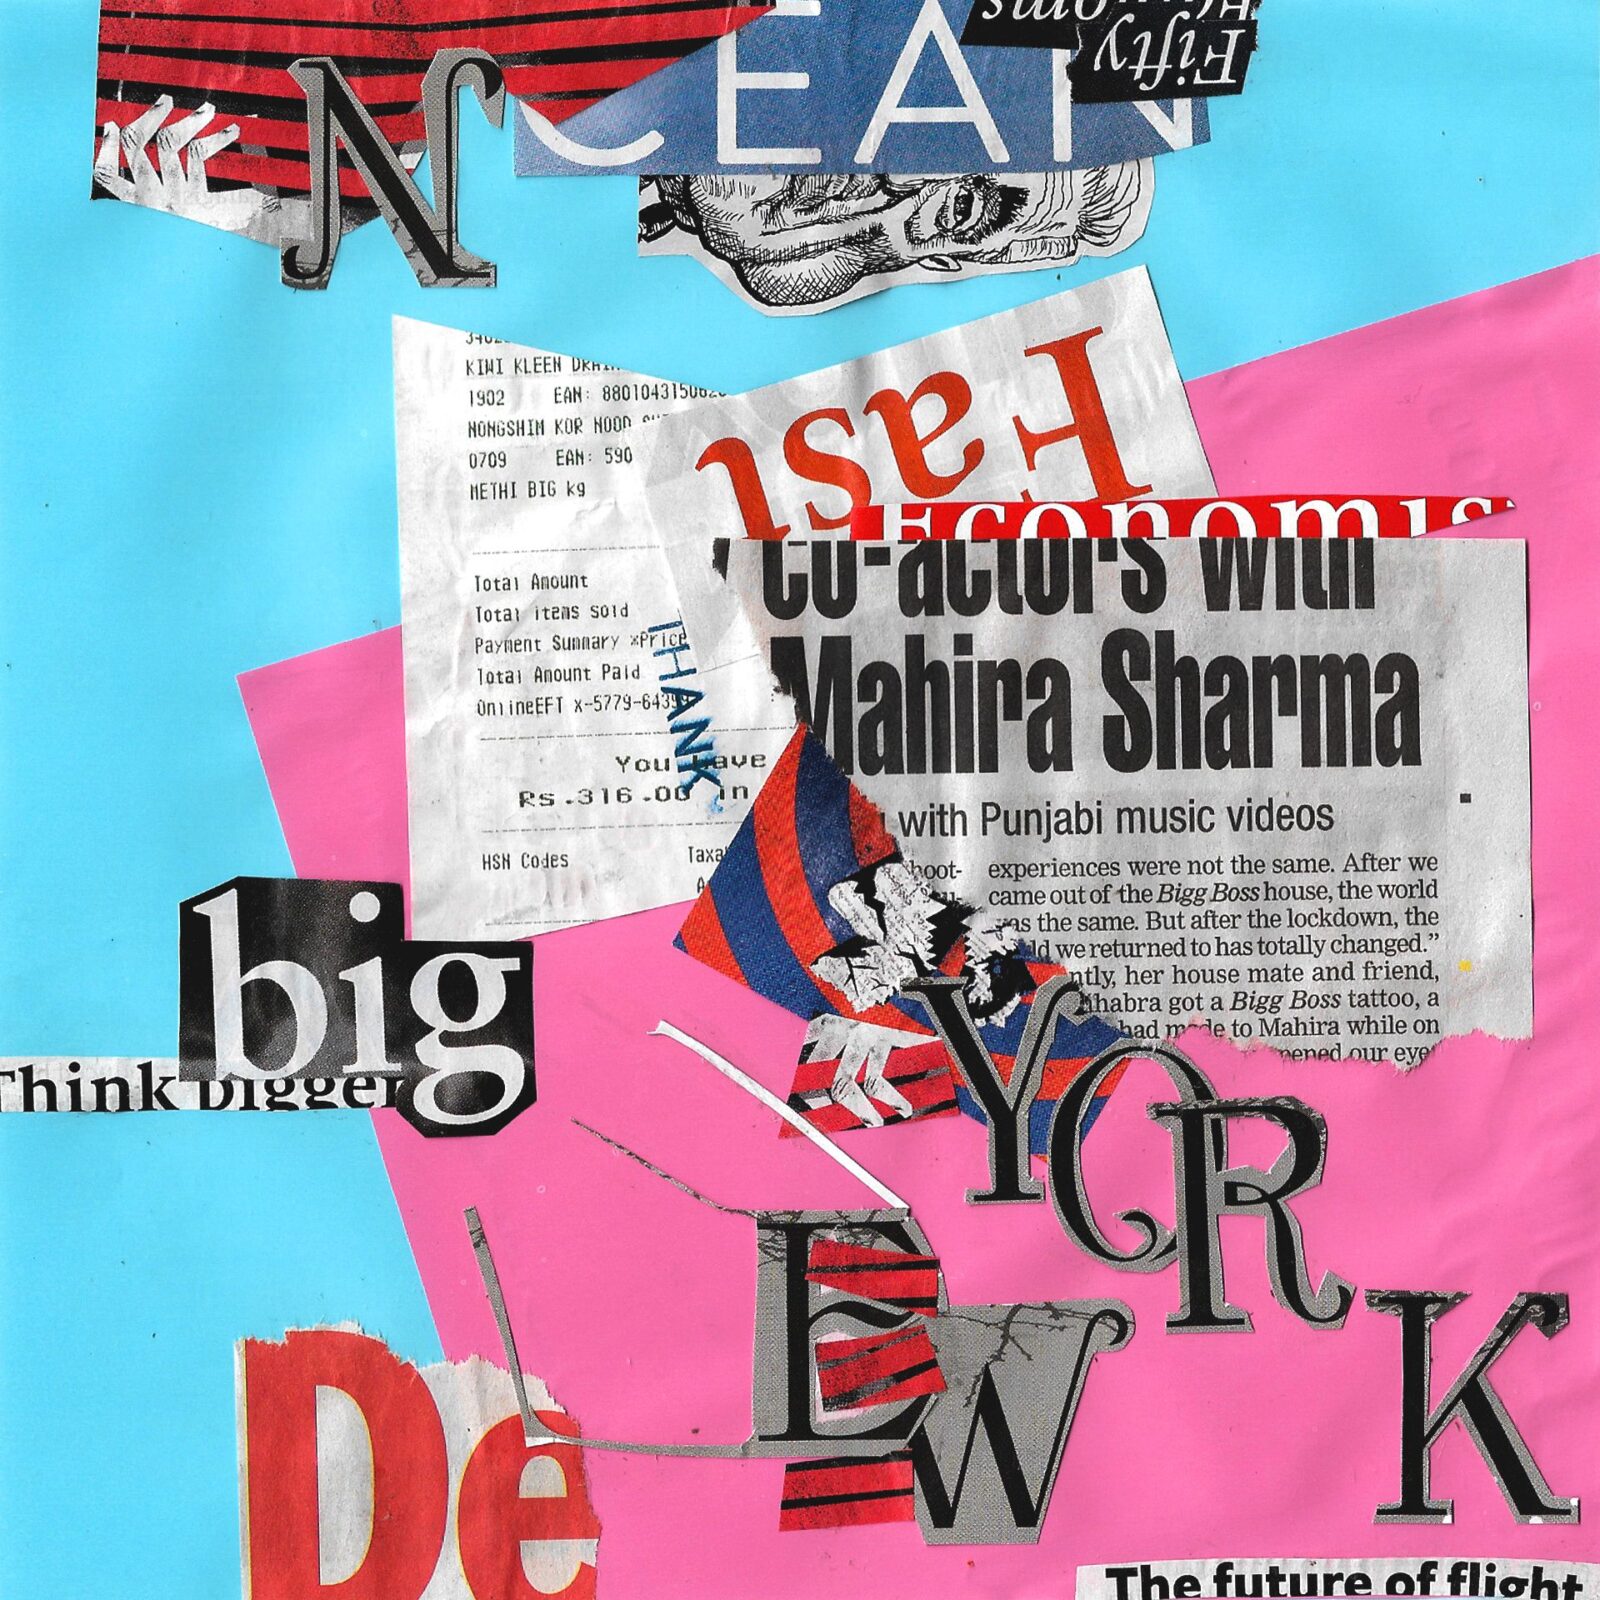 Collage_20122020_4